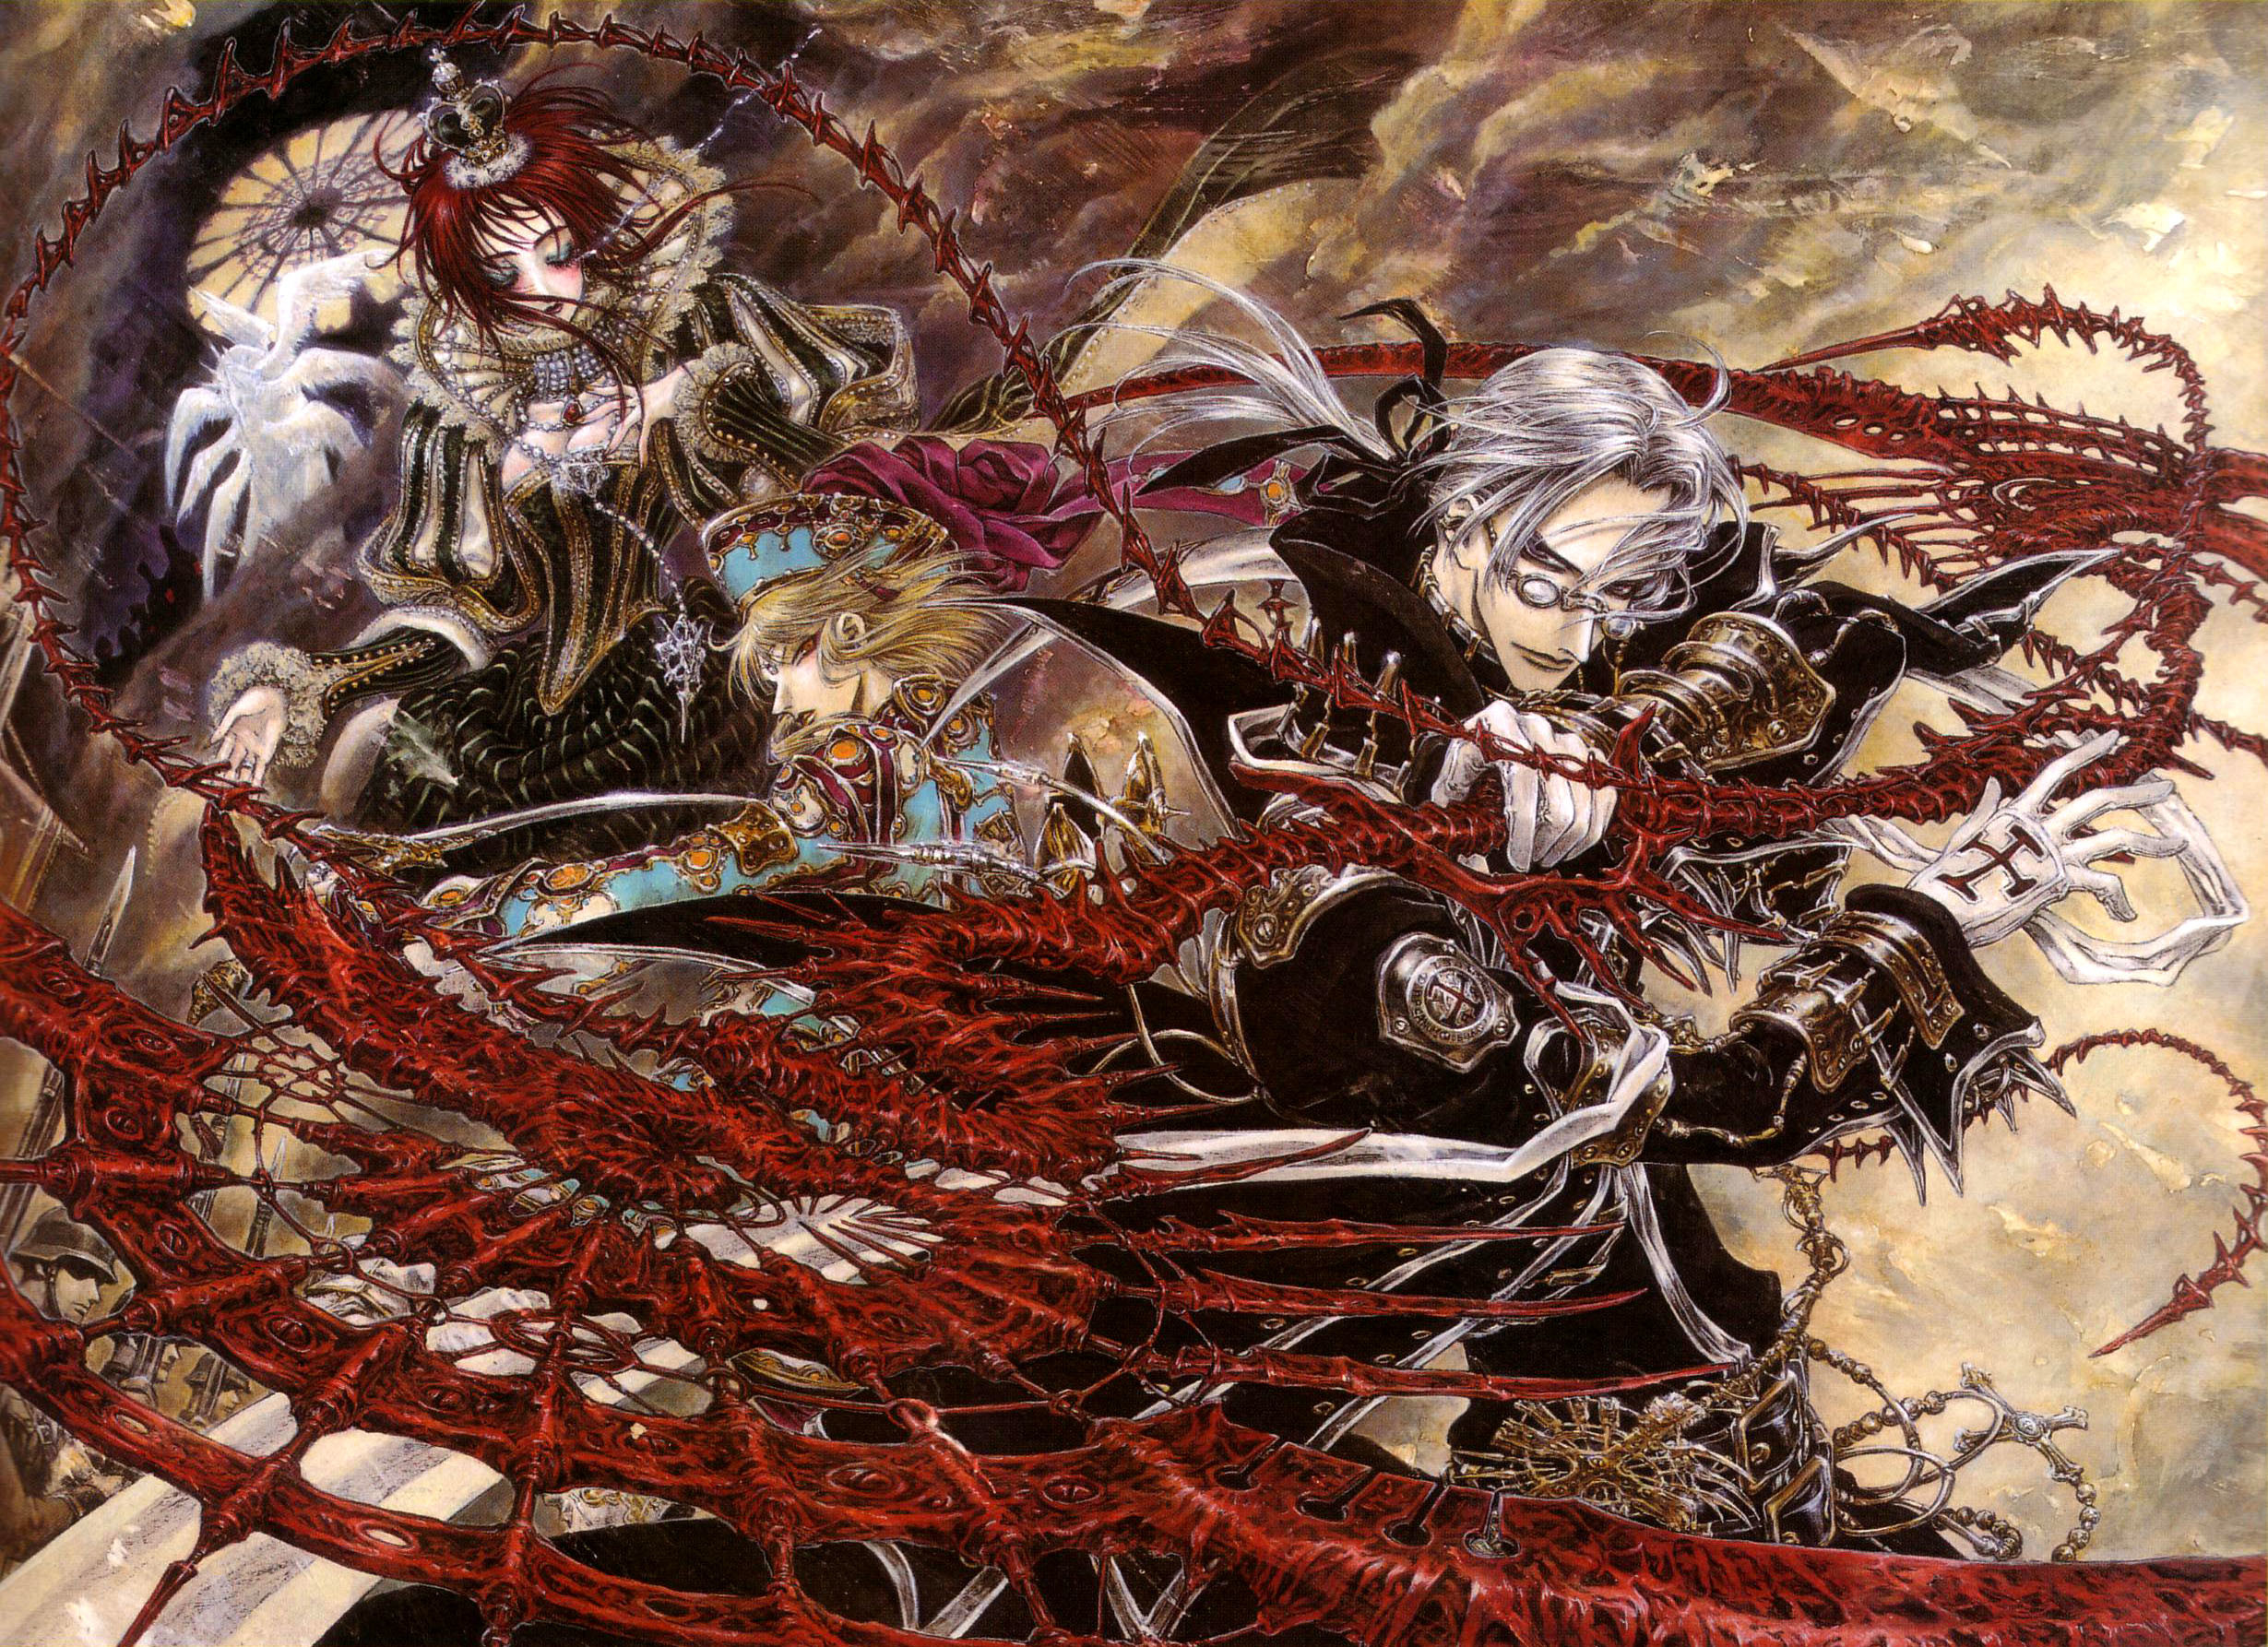 Trinity Blood Wallpapers - Wallpaper Cave